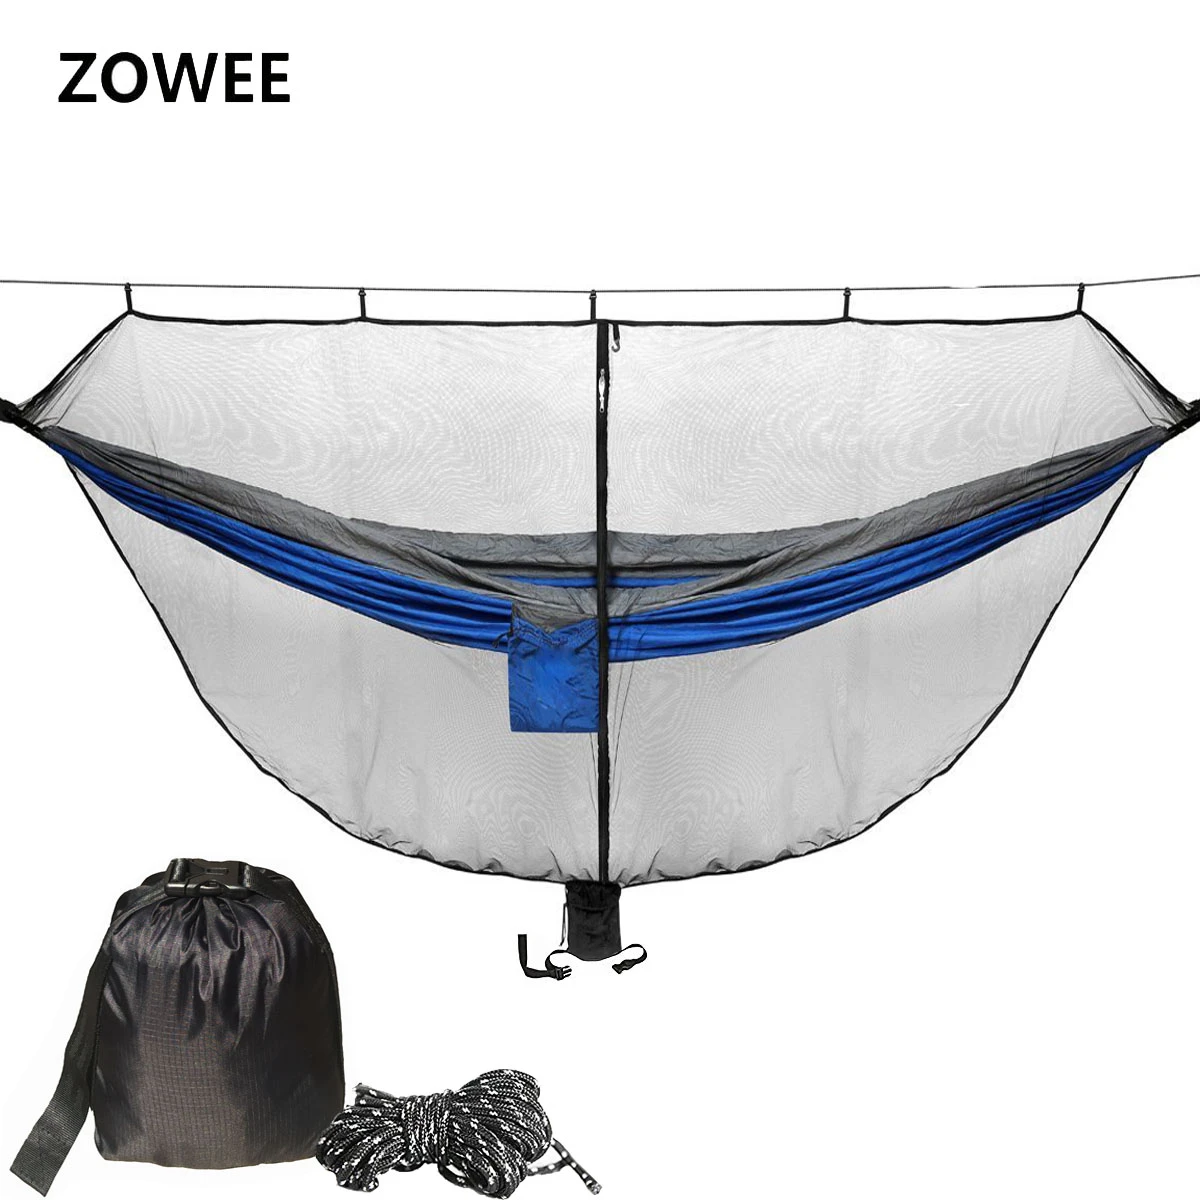 outdoor chairs Portable Hammock Mosquito net Camping Survival Garden  Hunting Leisure Hamac Travel Double Person Hamak outdoor patio furniture